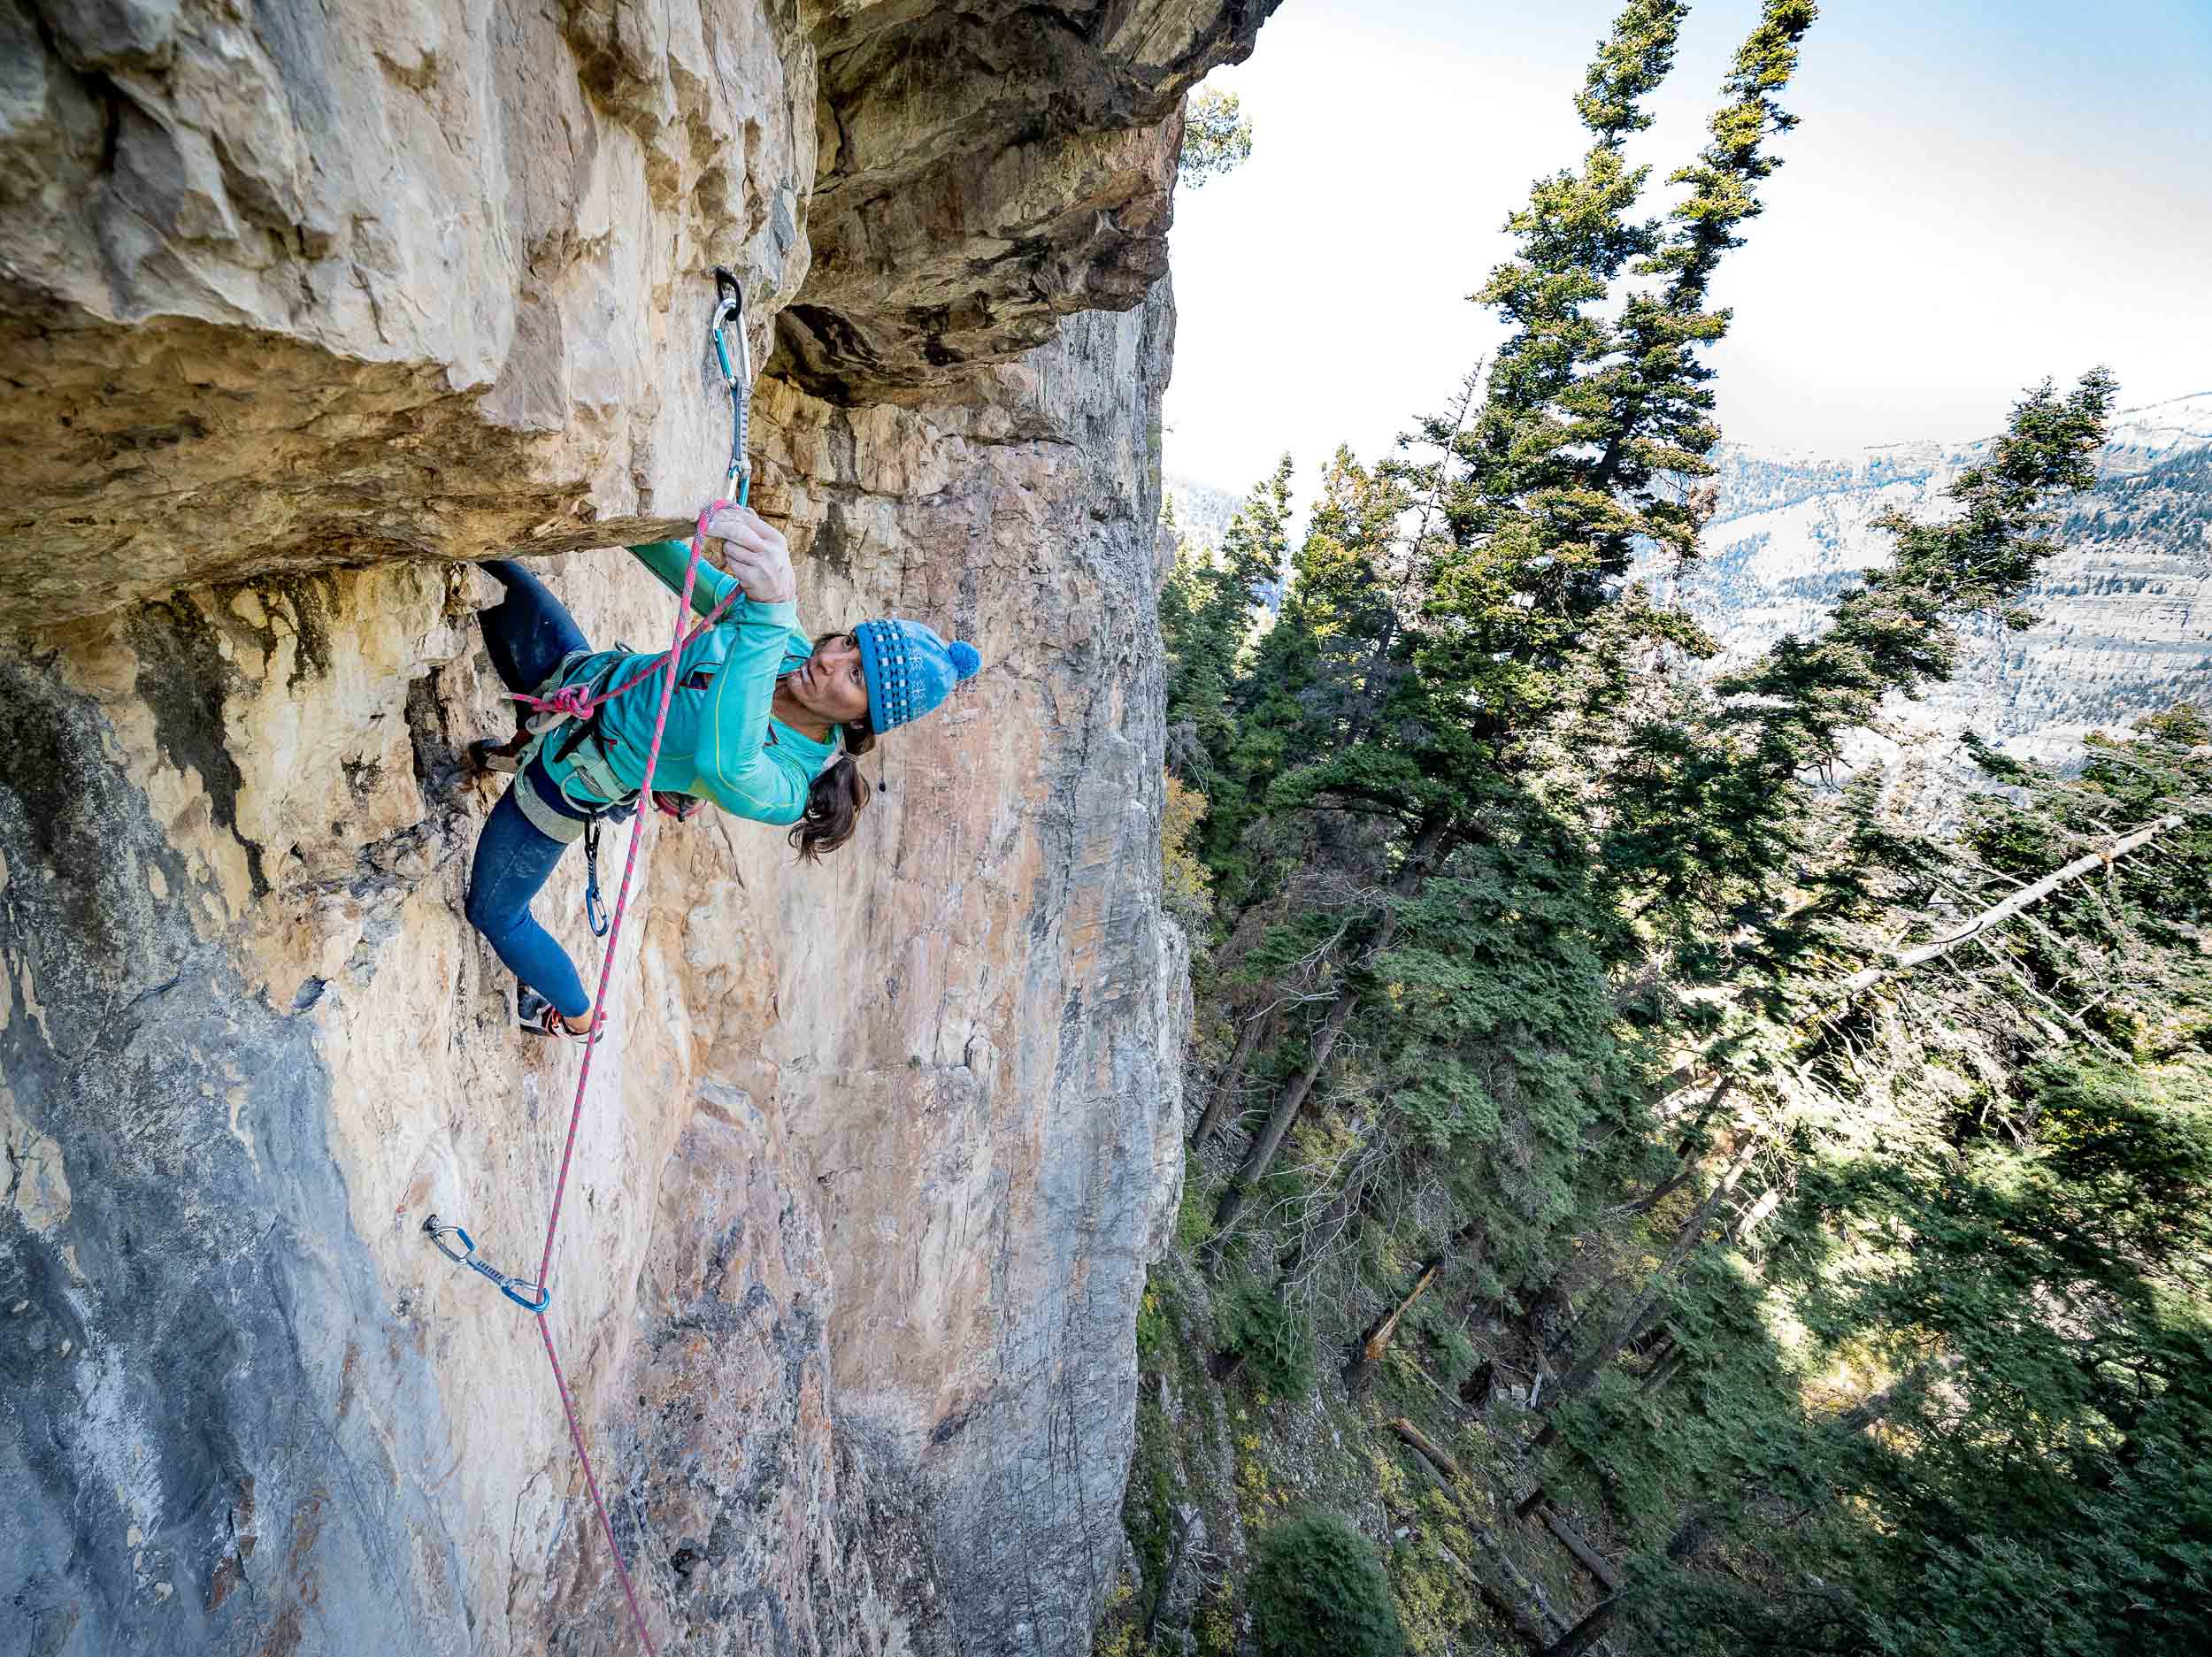 Mary Harlan on (5.11a) at the Jimmy Cliff